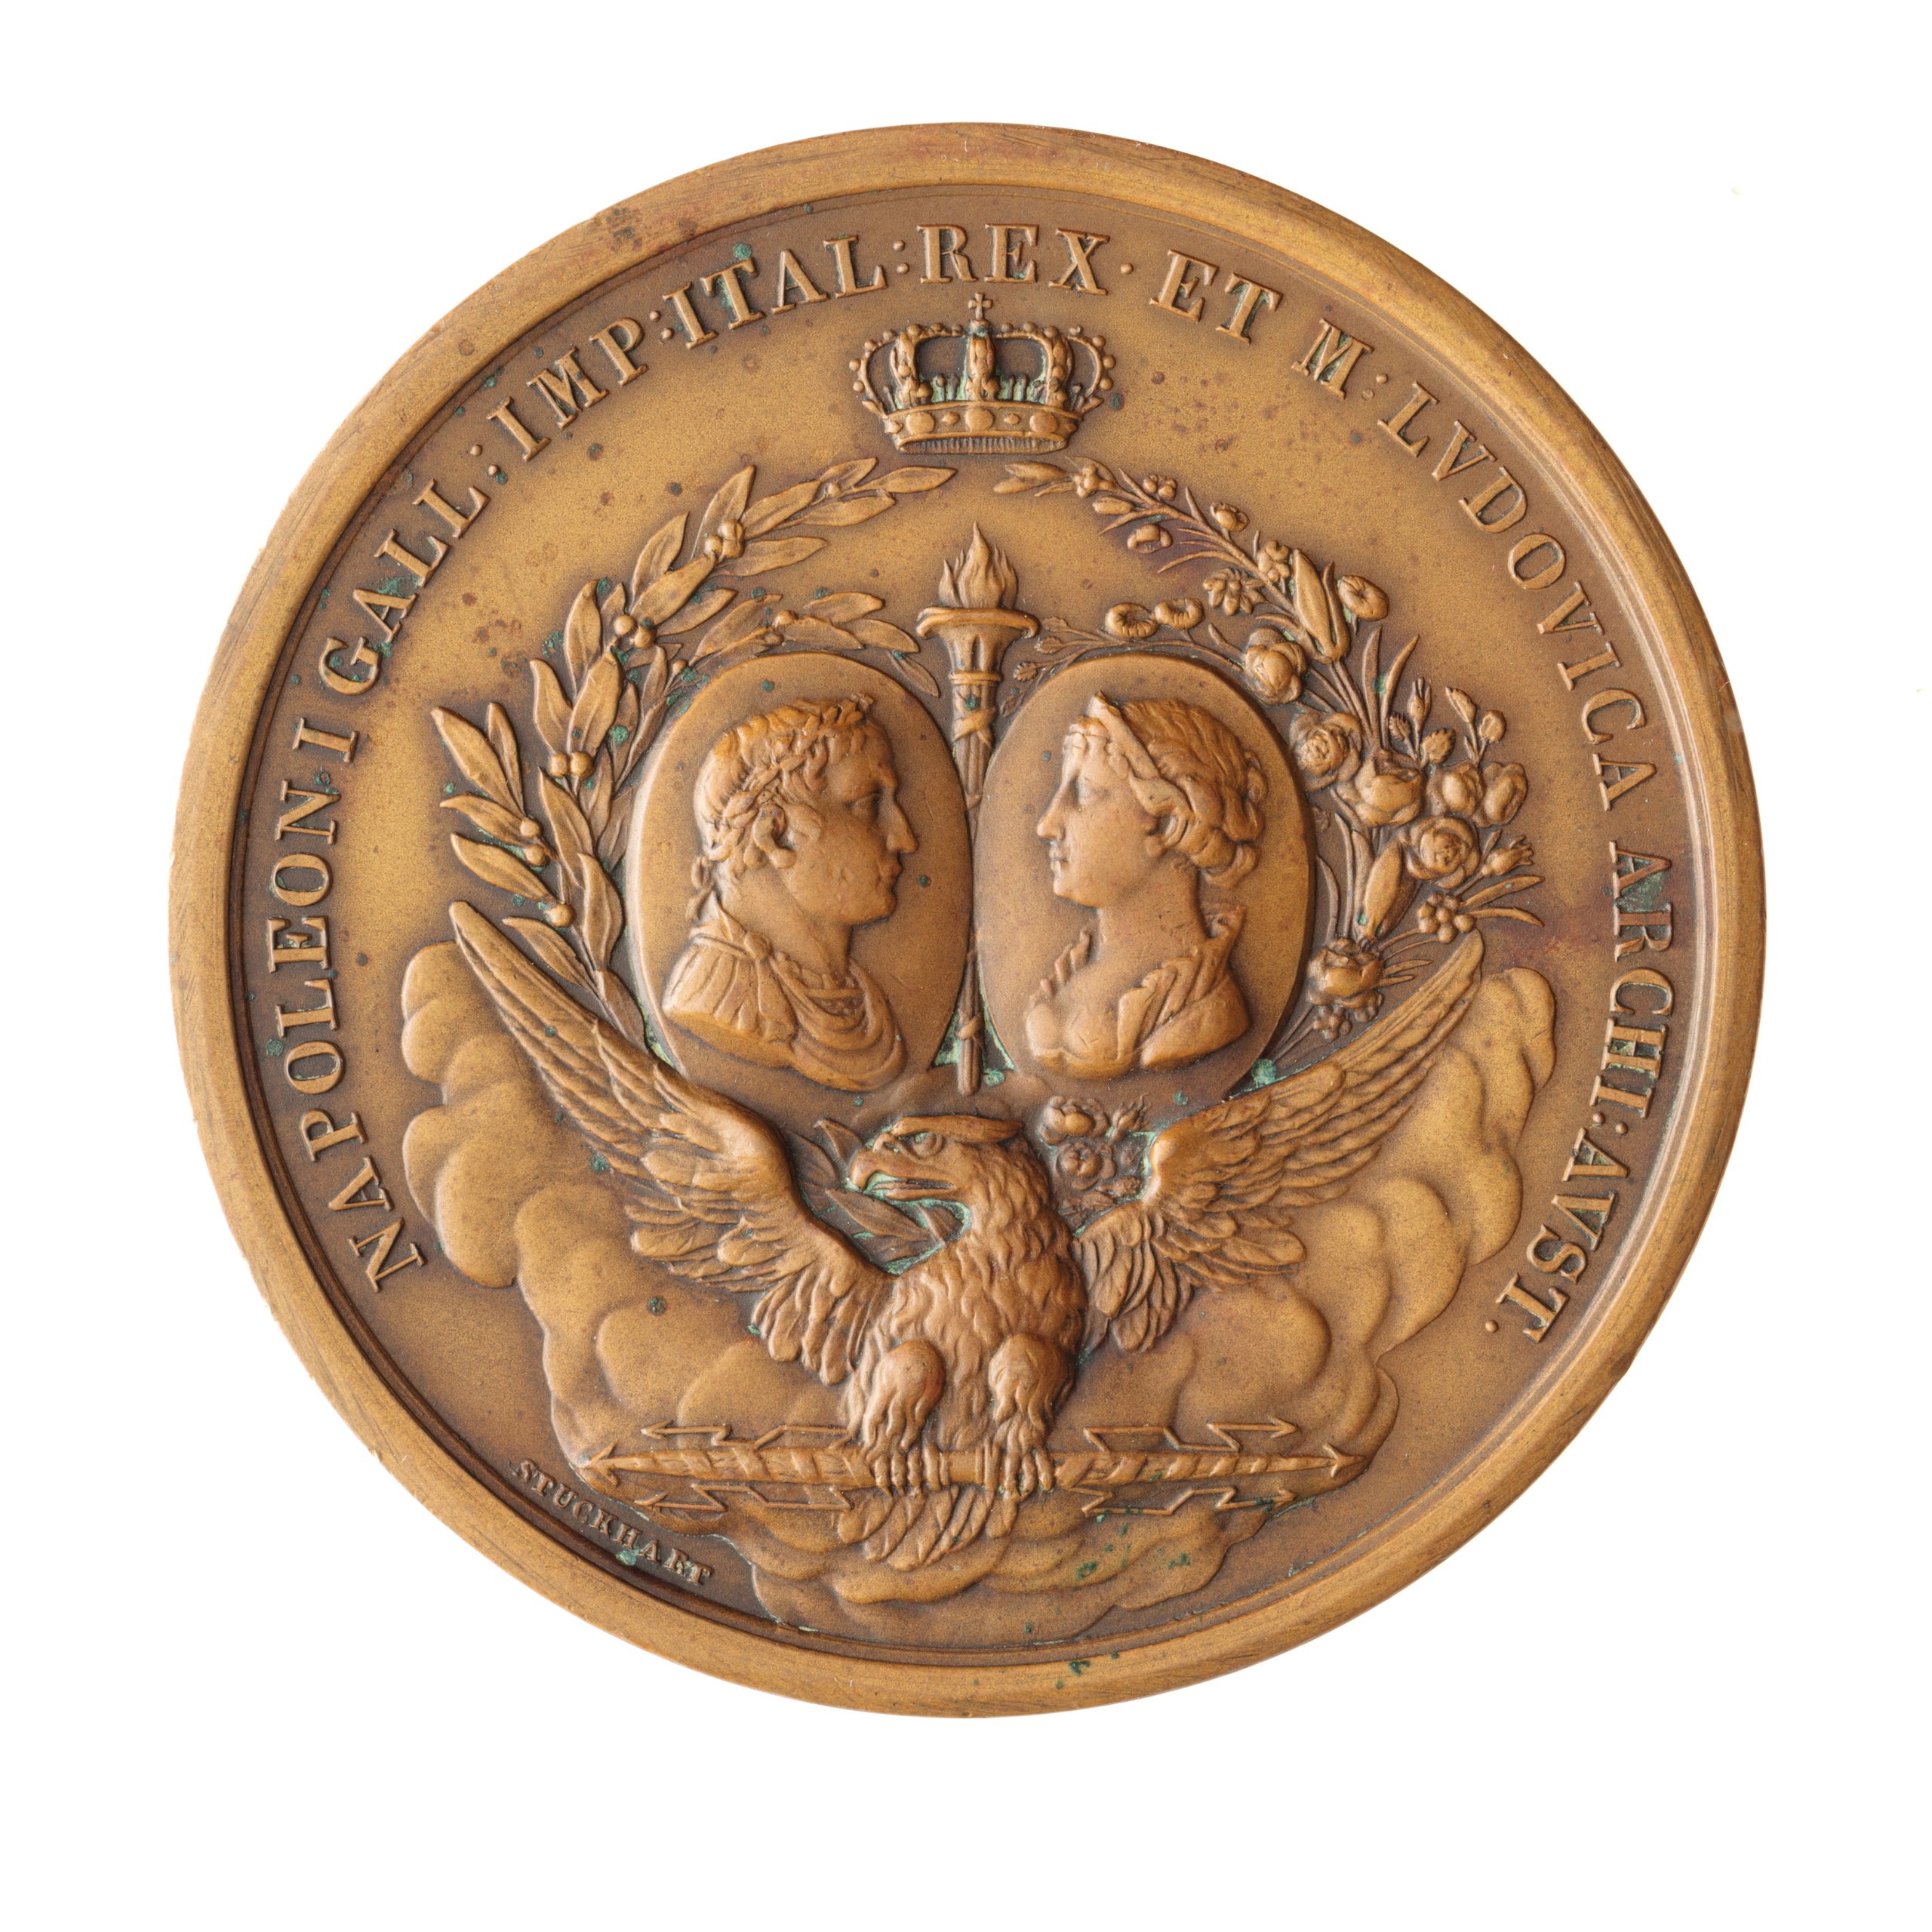 Medallion marking birth of King of Rome